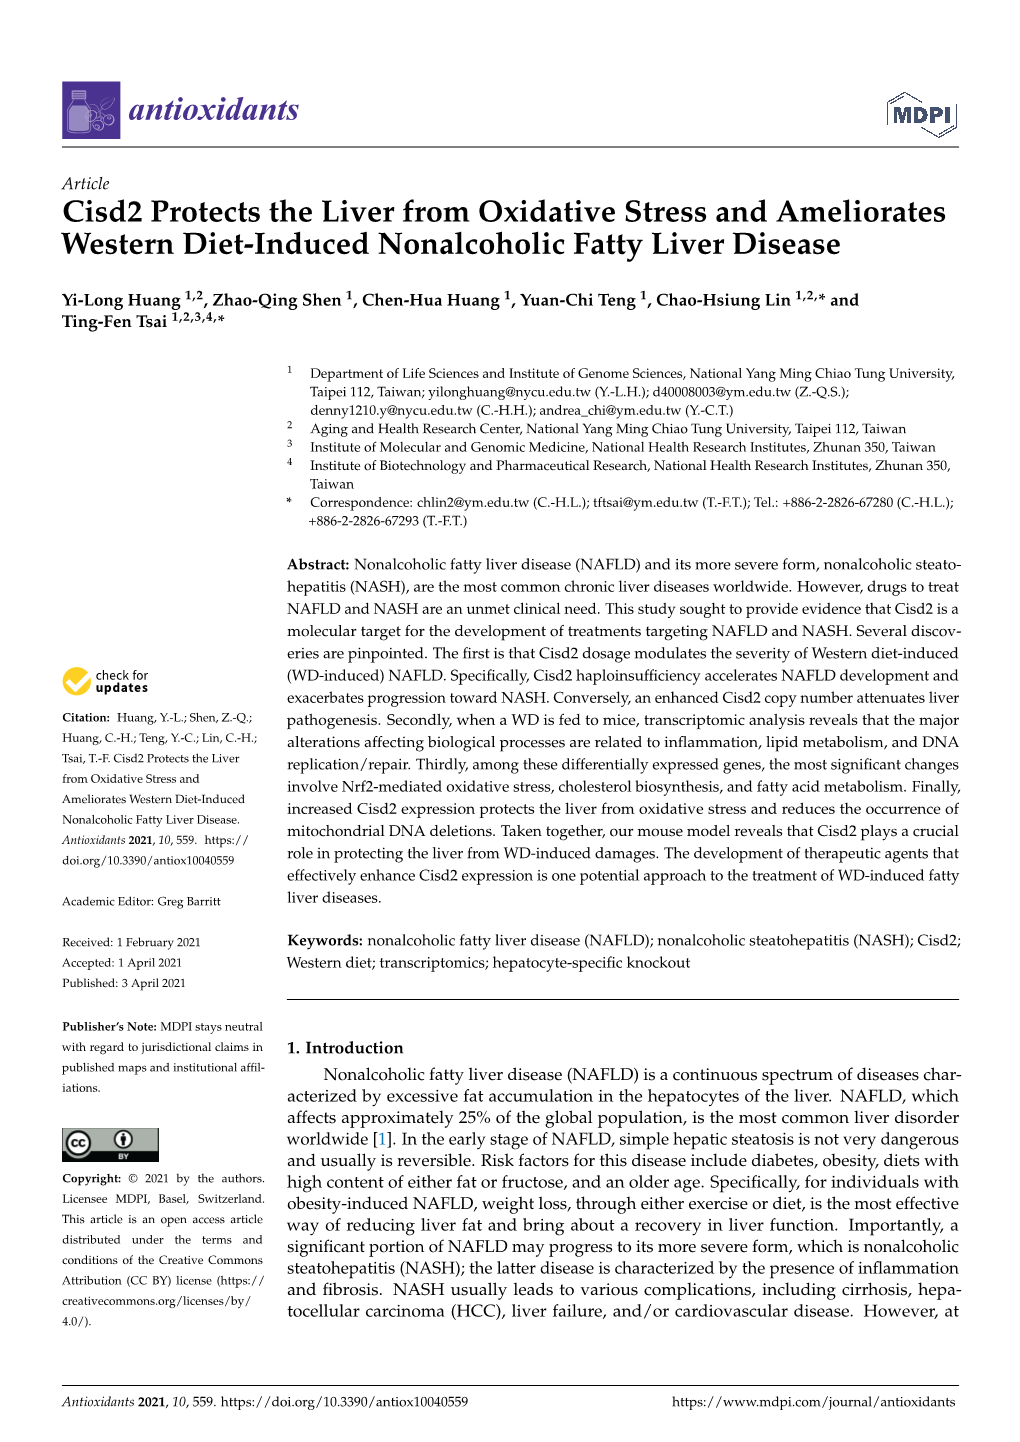 Cisd2 Protects the Liver from Oxidative Stress and Ameliorates Western Diet-Induced Nonalcoholic Fatty Liver Disease